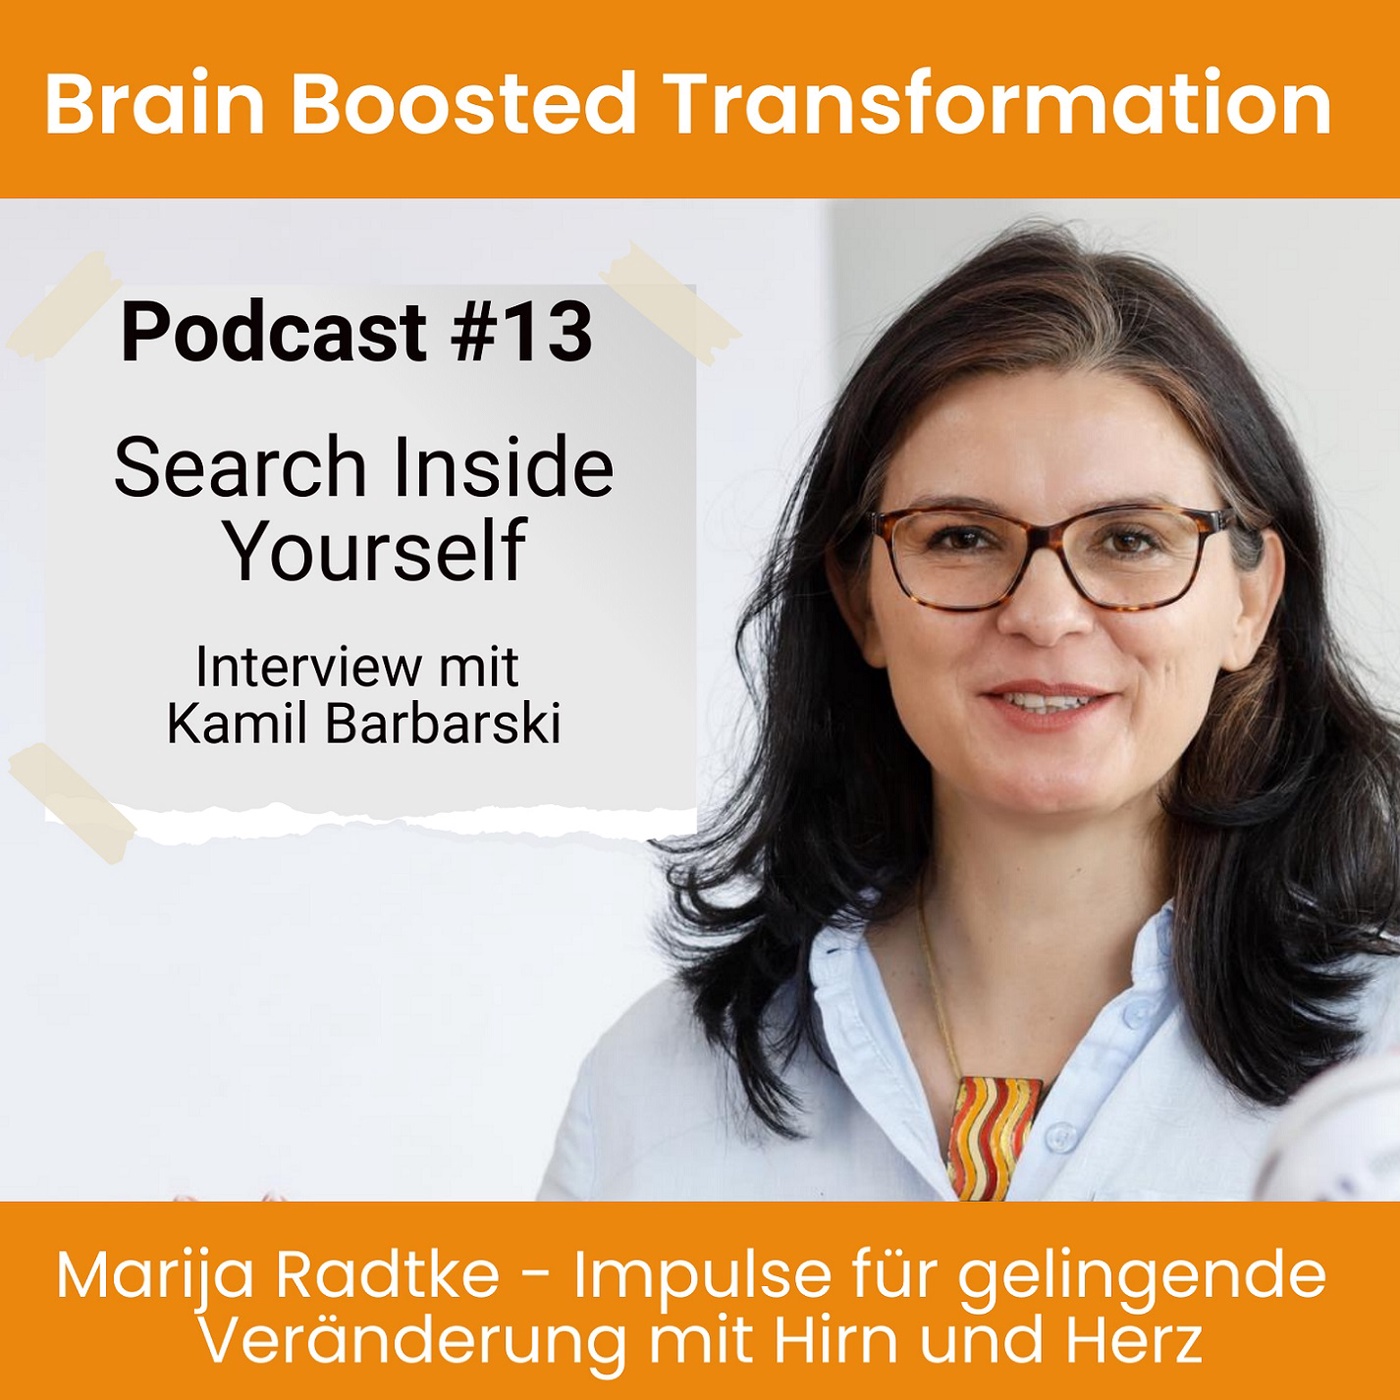 # 13 - Search Inside Yourself (SIY) - Interview mit Kamil Barbarski